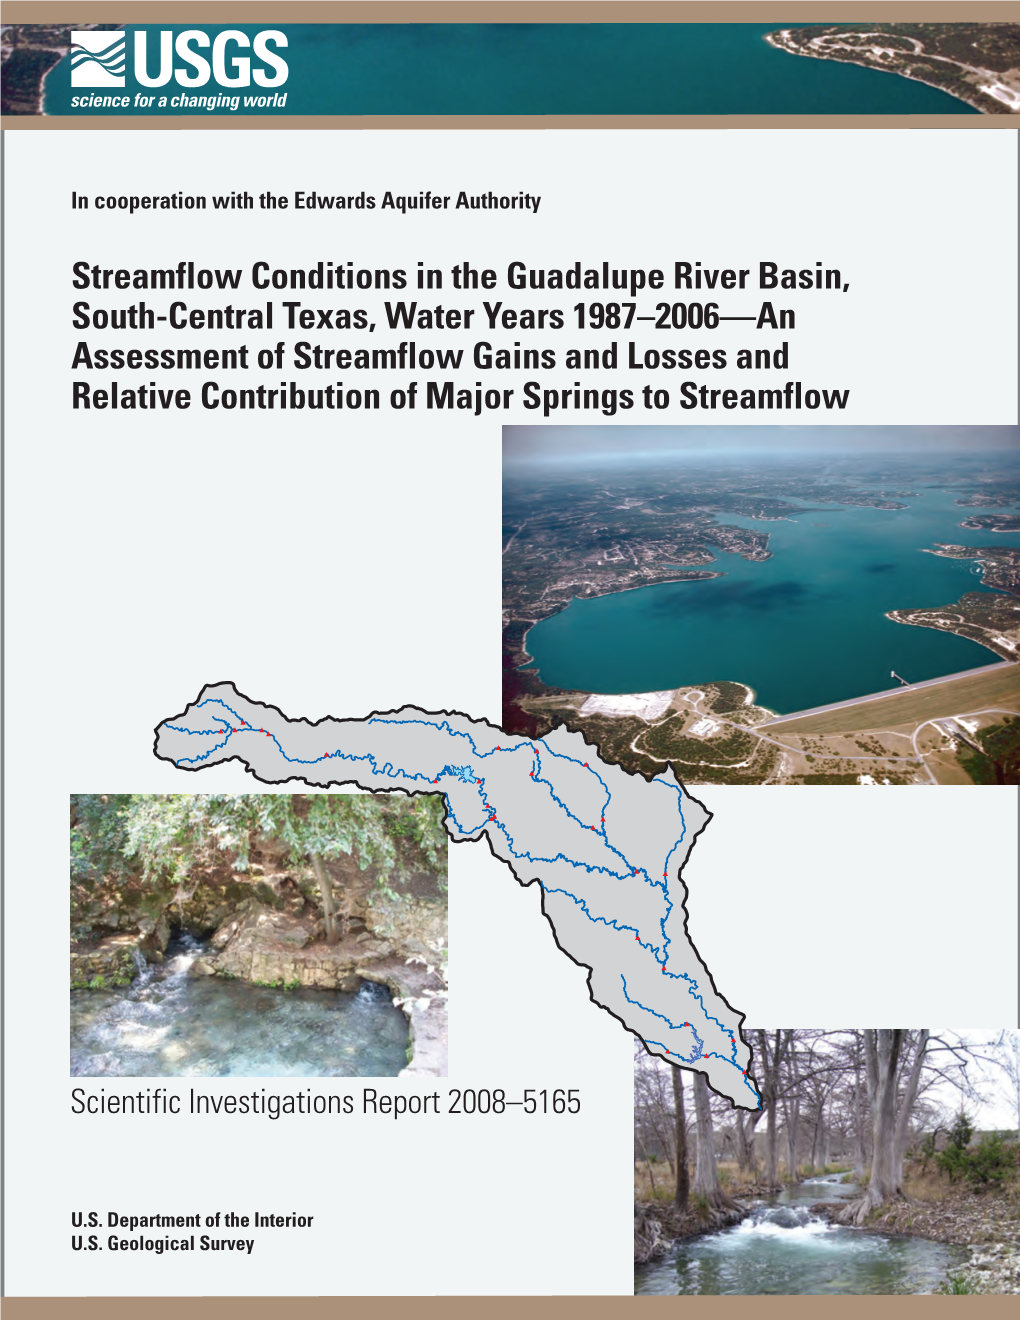 Streamflow Conditions in the Guadalupe River Basin, South